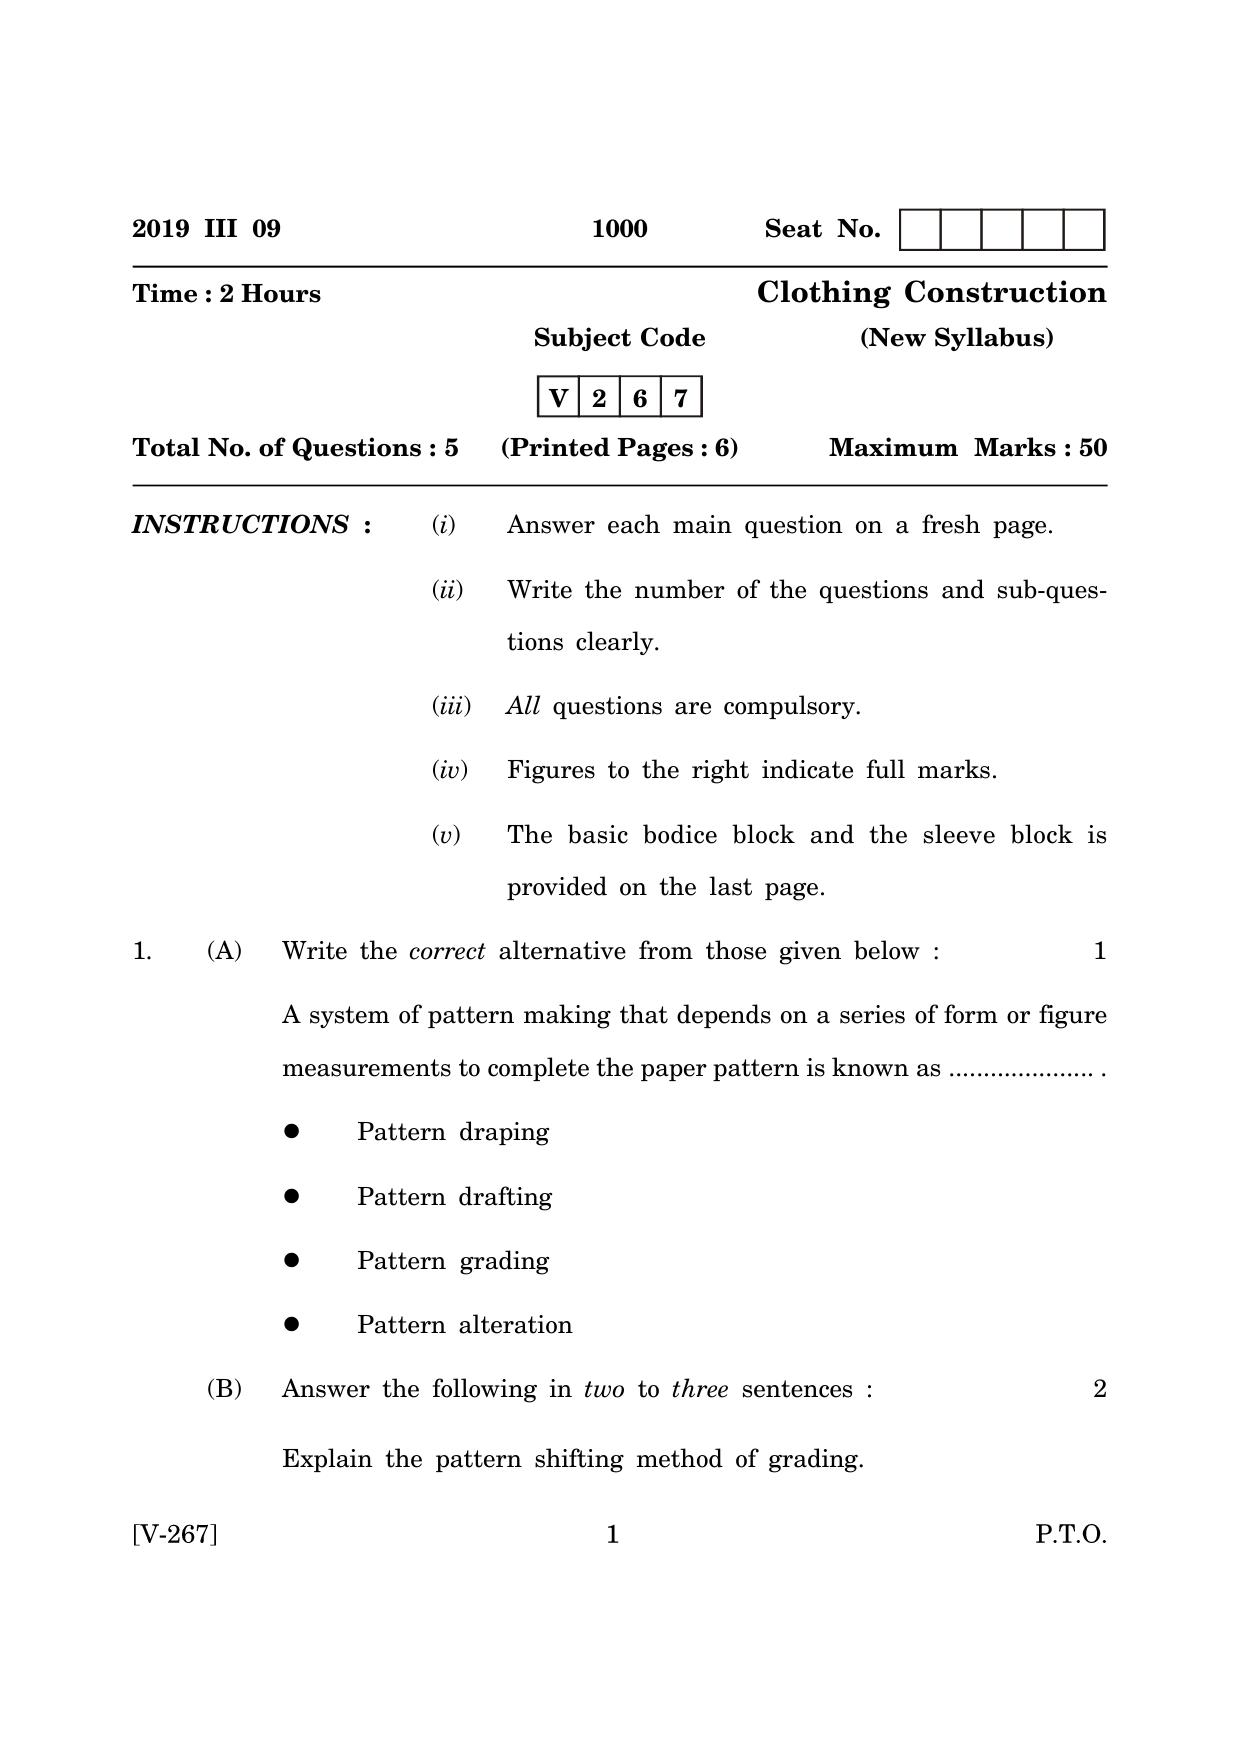 Goa Board Class 12 Clothing Construction   (March 2019) Question Paper - Page 1